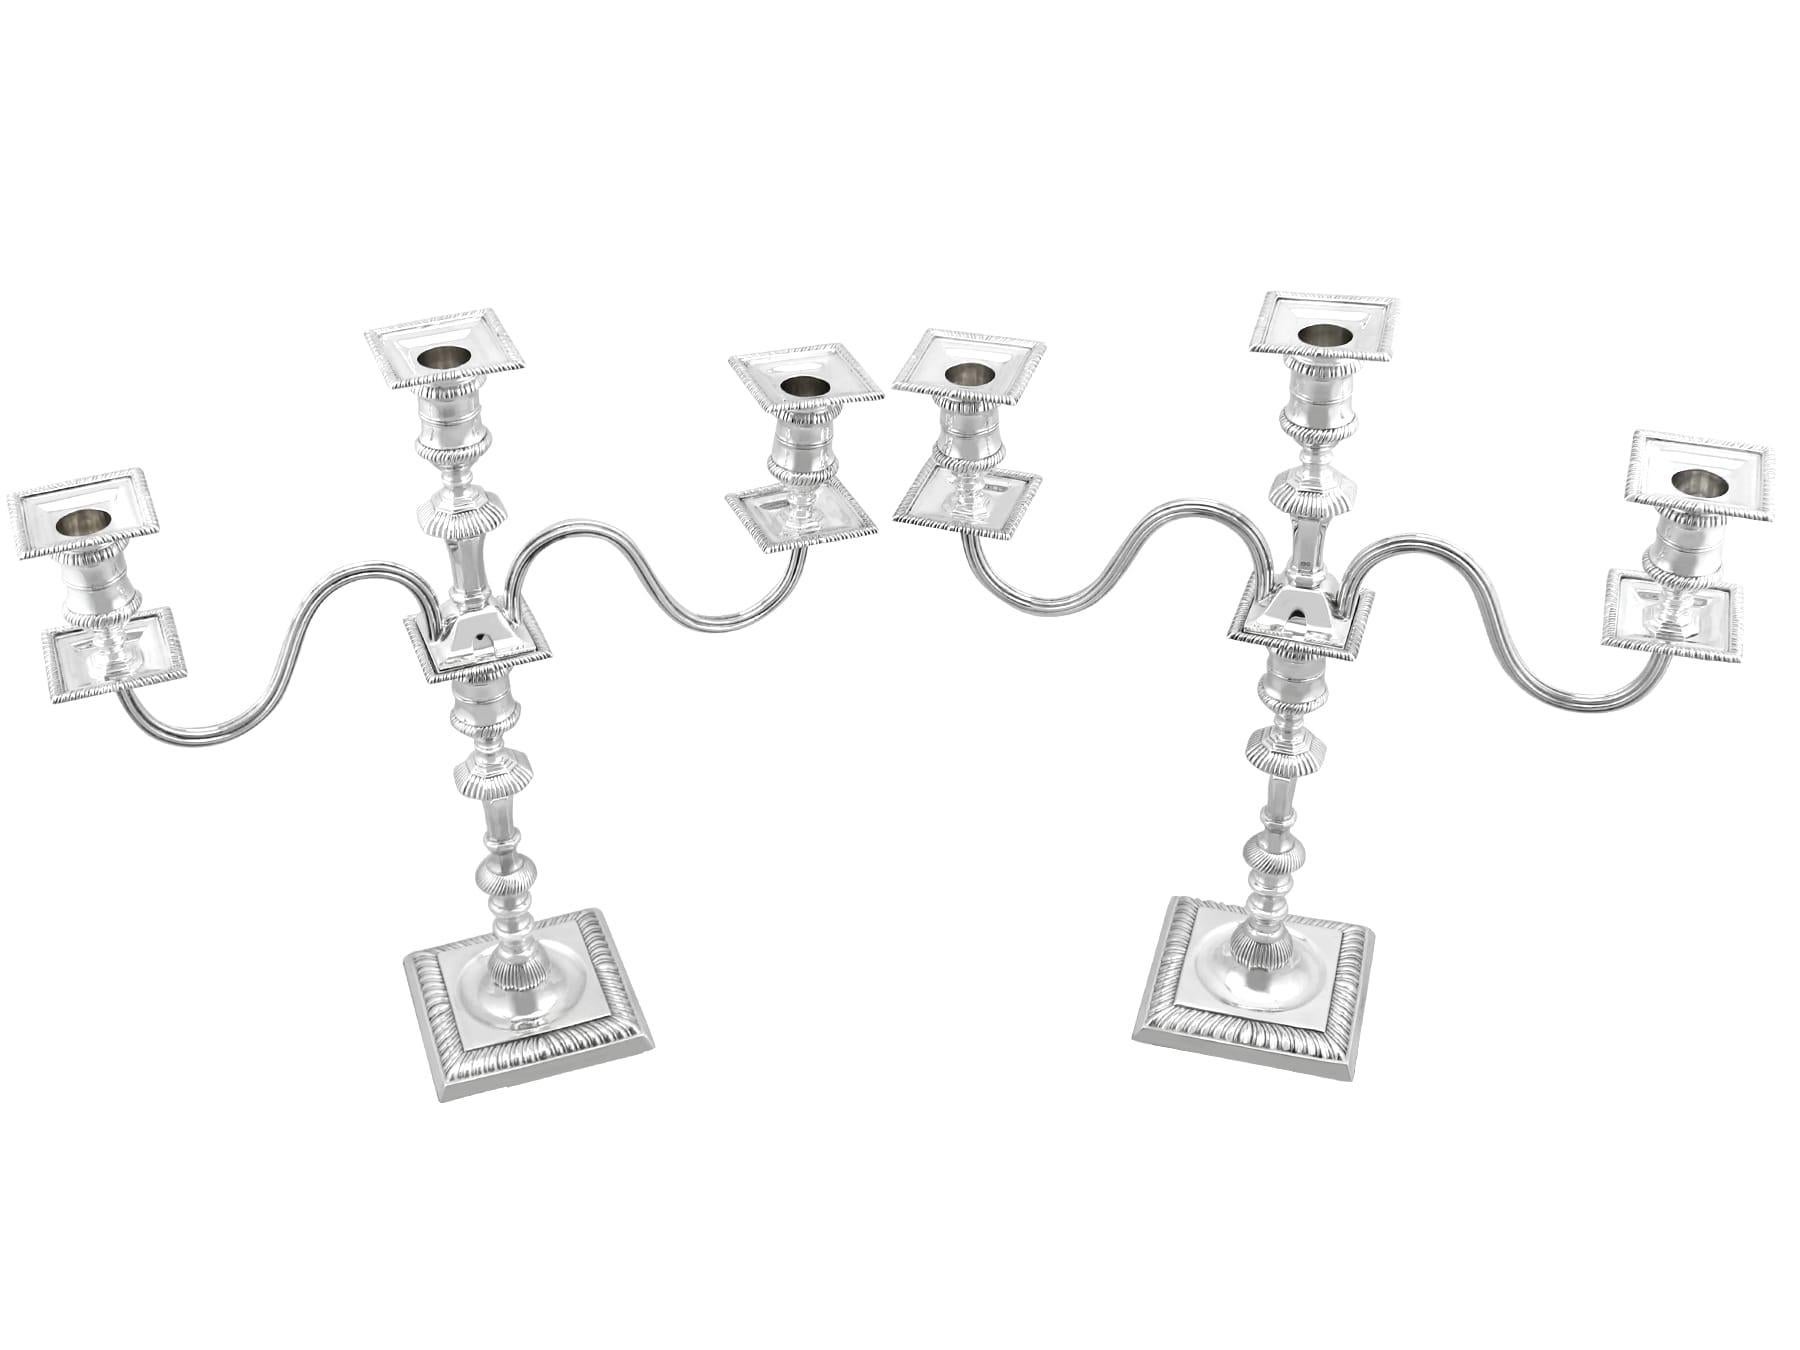 An exceptional, fine and impressive pair of versatile antique Victorian English sterling silver three-light candelabra; an addition to our ornamental silverware collection

These exceptional antique Victorian sterling silver candelabra have a